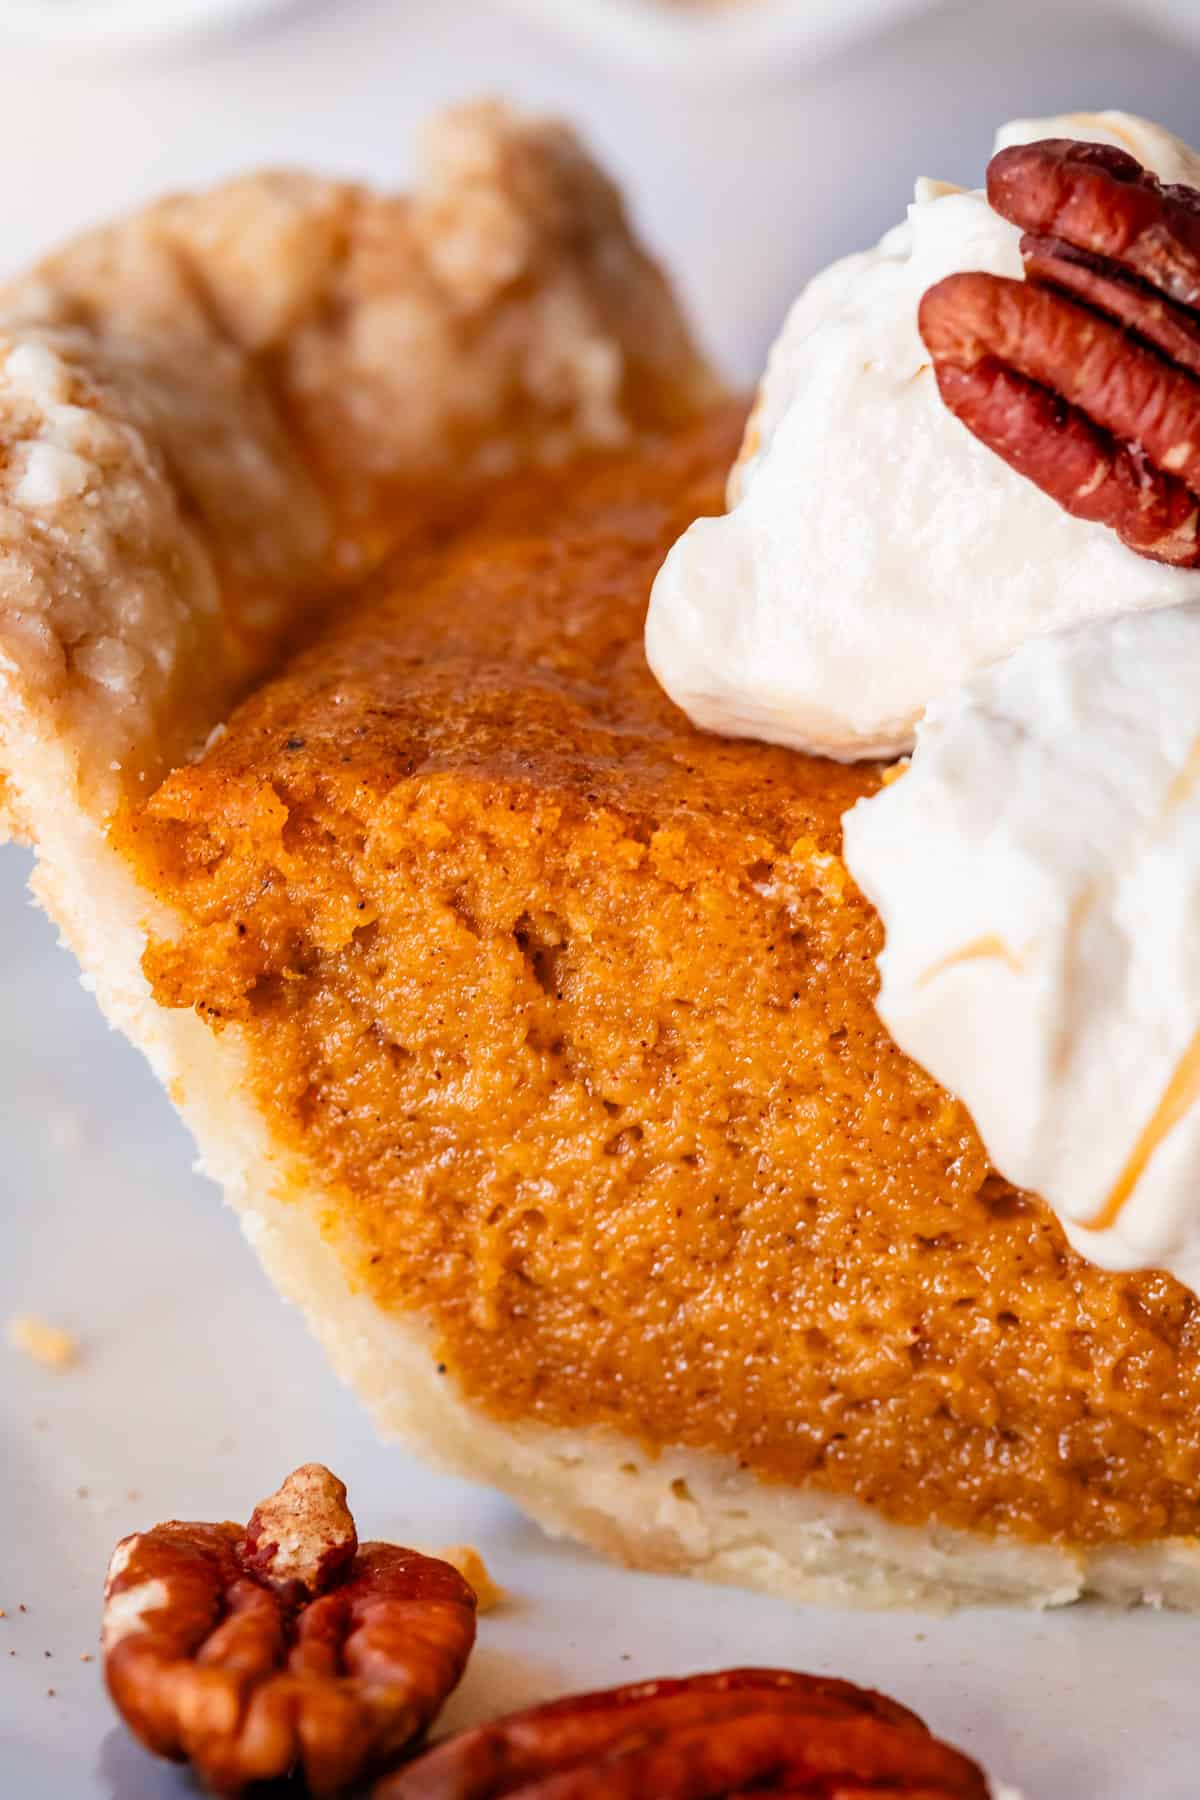 side shot showing the light and creamy texture of the sweet potato pie.